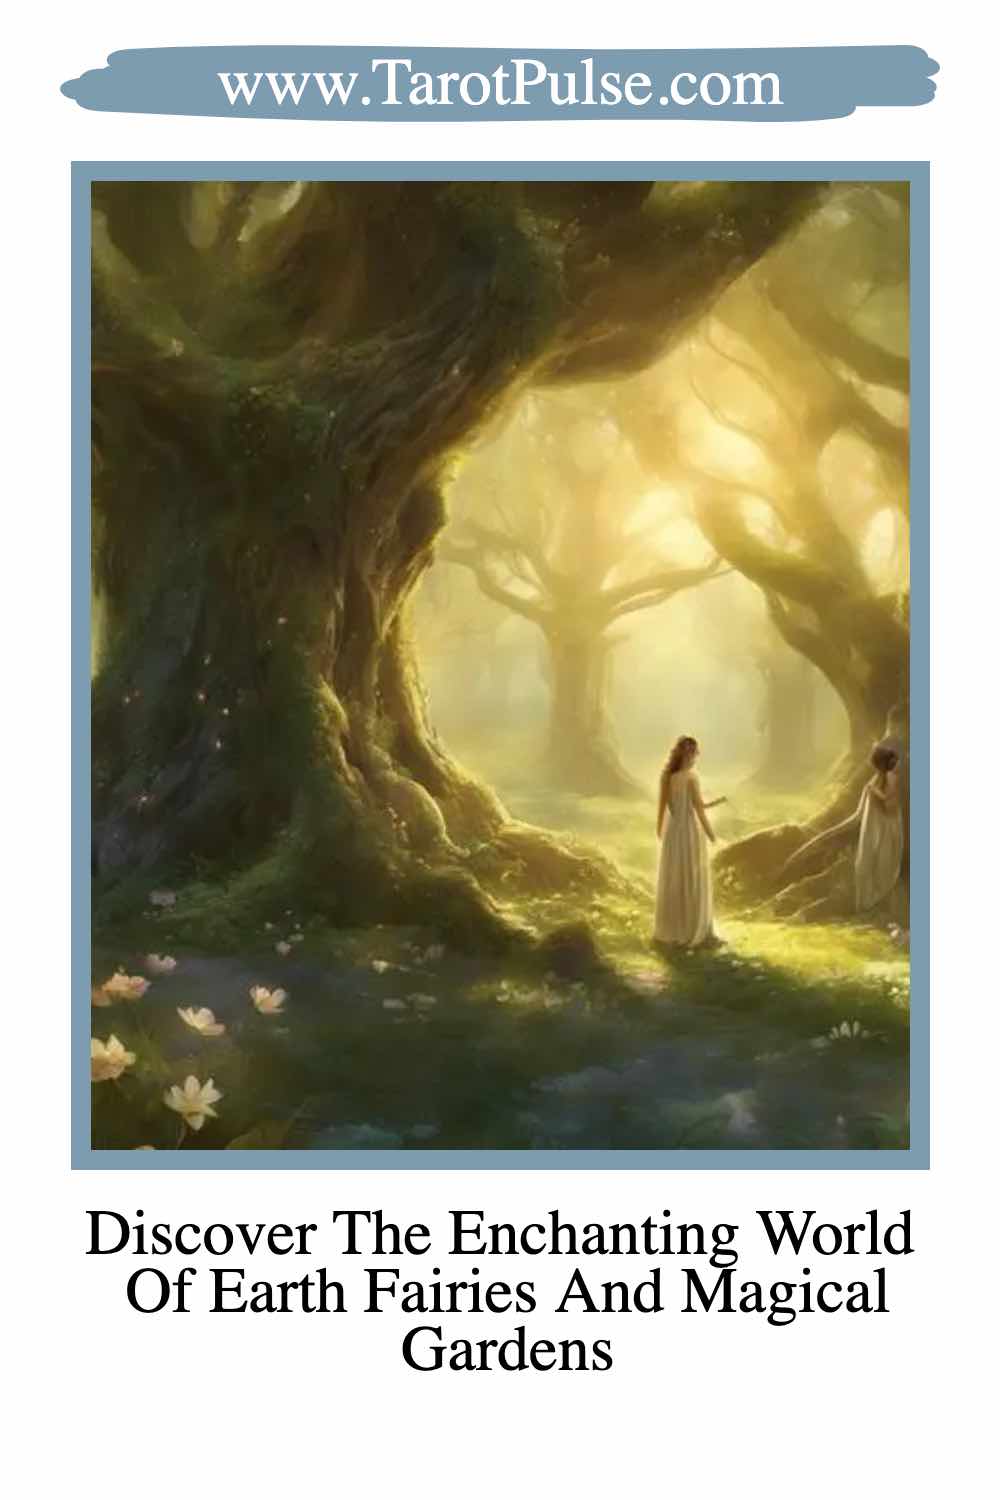 Discover the Enchanting World of Earth Fairies and Magical Gardens